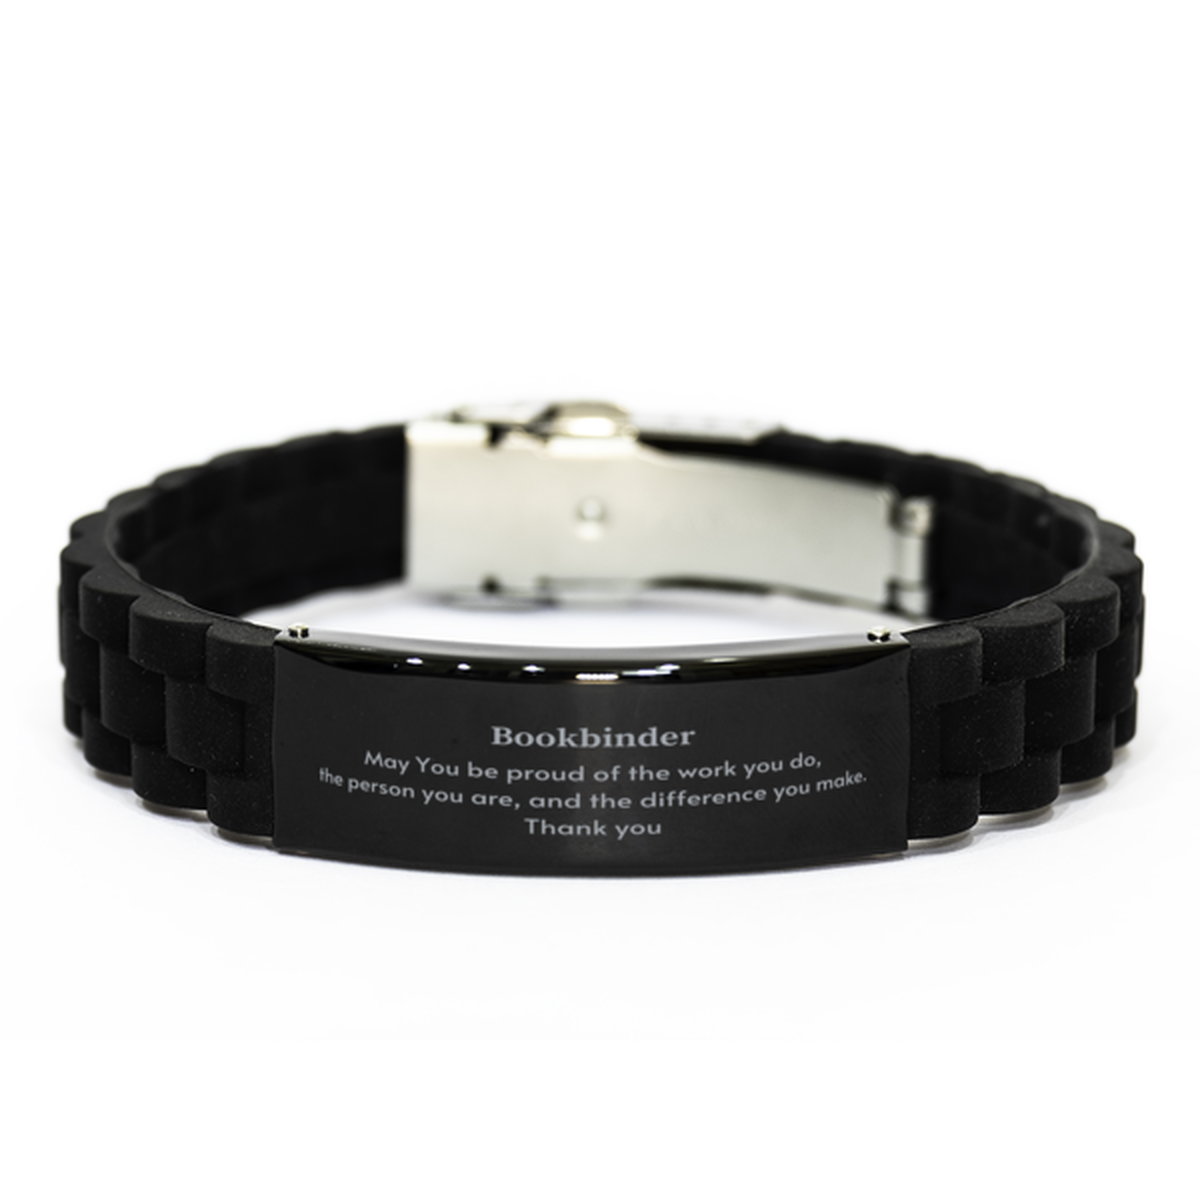 Heartwarming Black Glidelock Clasp Bracelet Retirement Coworkers Gifts for Bookbinder, Bookbinder May You be proud of the work you do, the person you are Gifts for Boss Men Women Friends